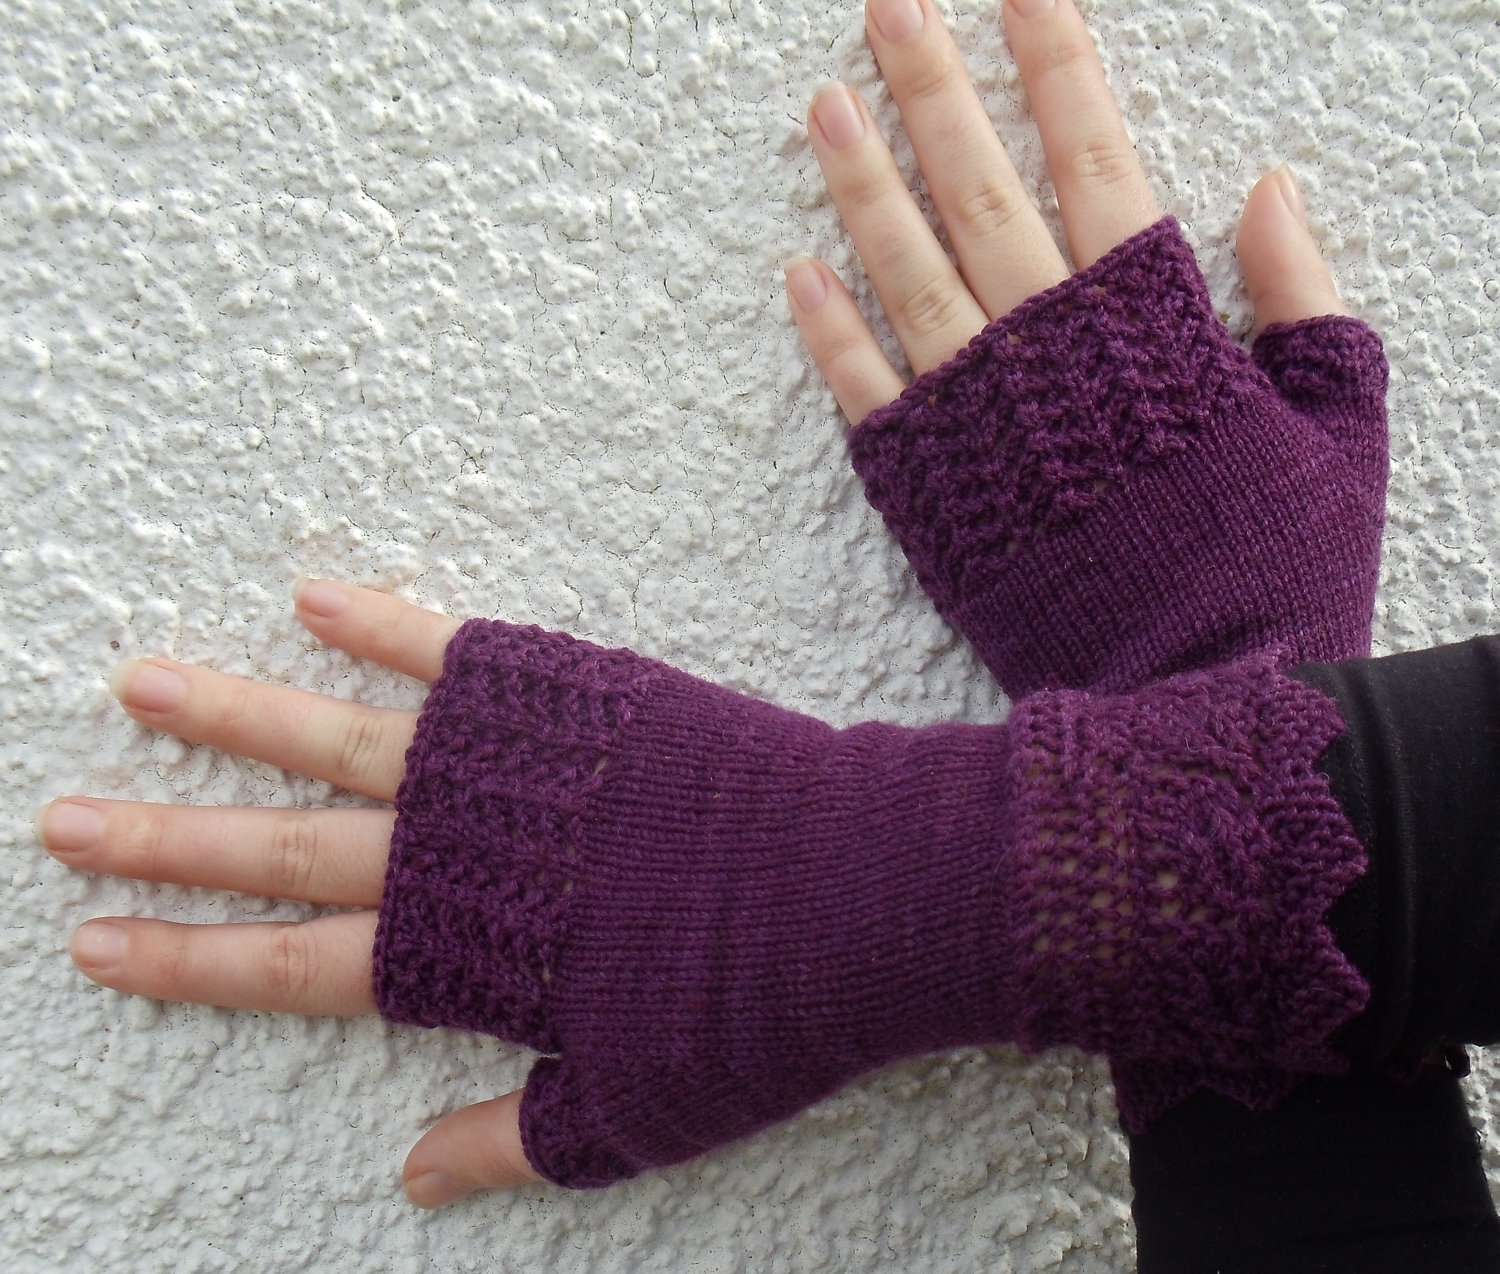 fingerless gloves knitting pattern these include special types of knits. they add a new dimension to the gloves. IKVBSST